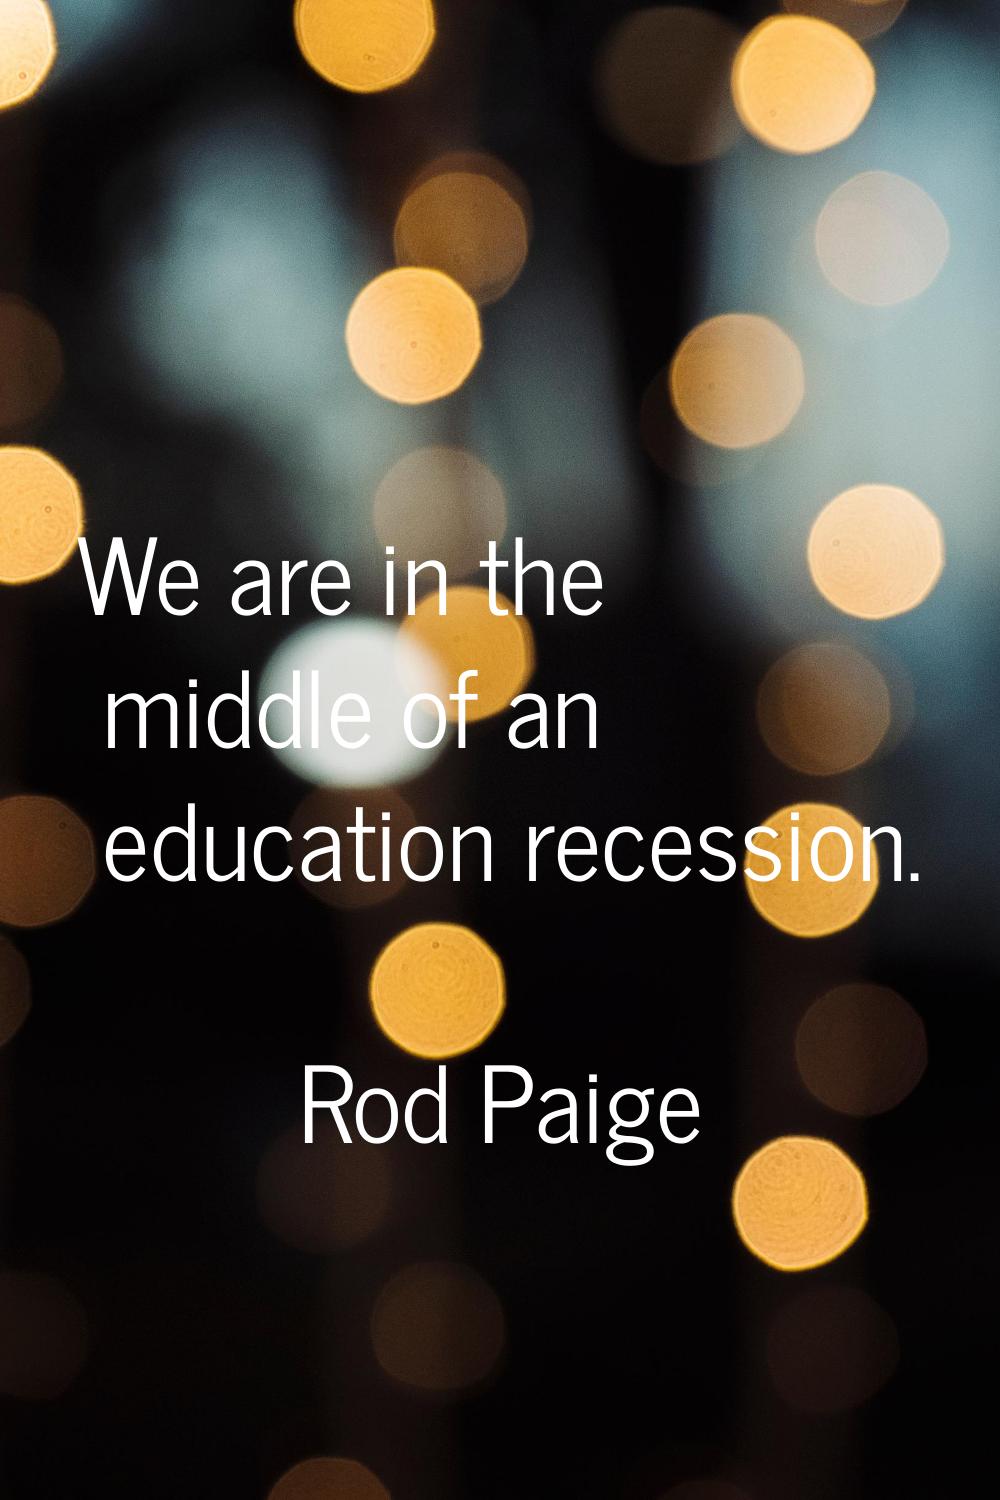 We are in the middle of an education recession.